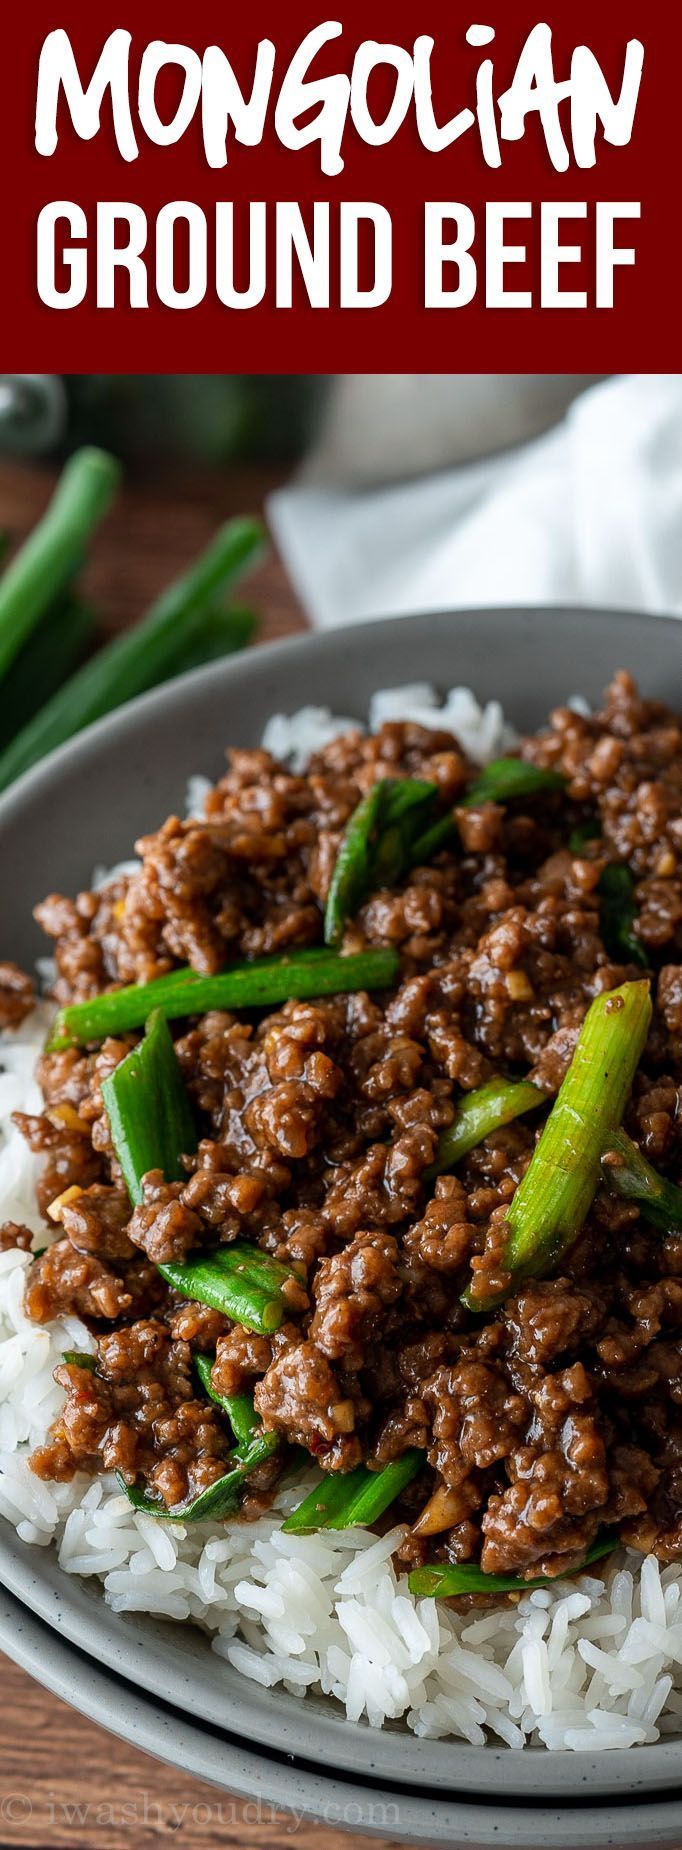 Mongolian Ground Beef Recipe -   19 healthy recipes For 2 ground beef ideas